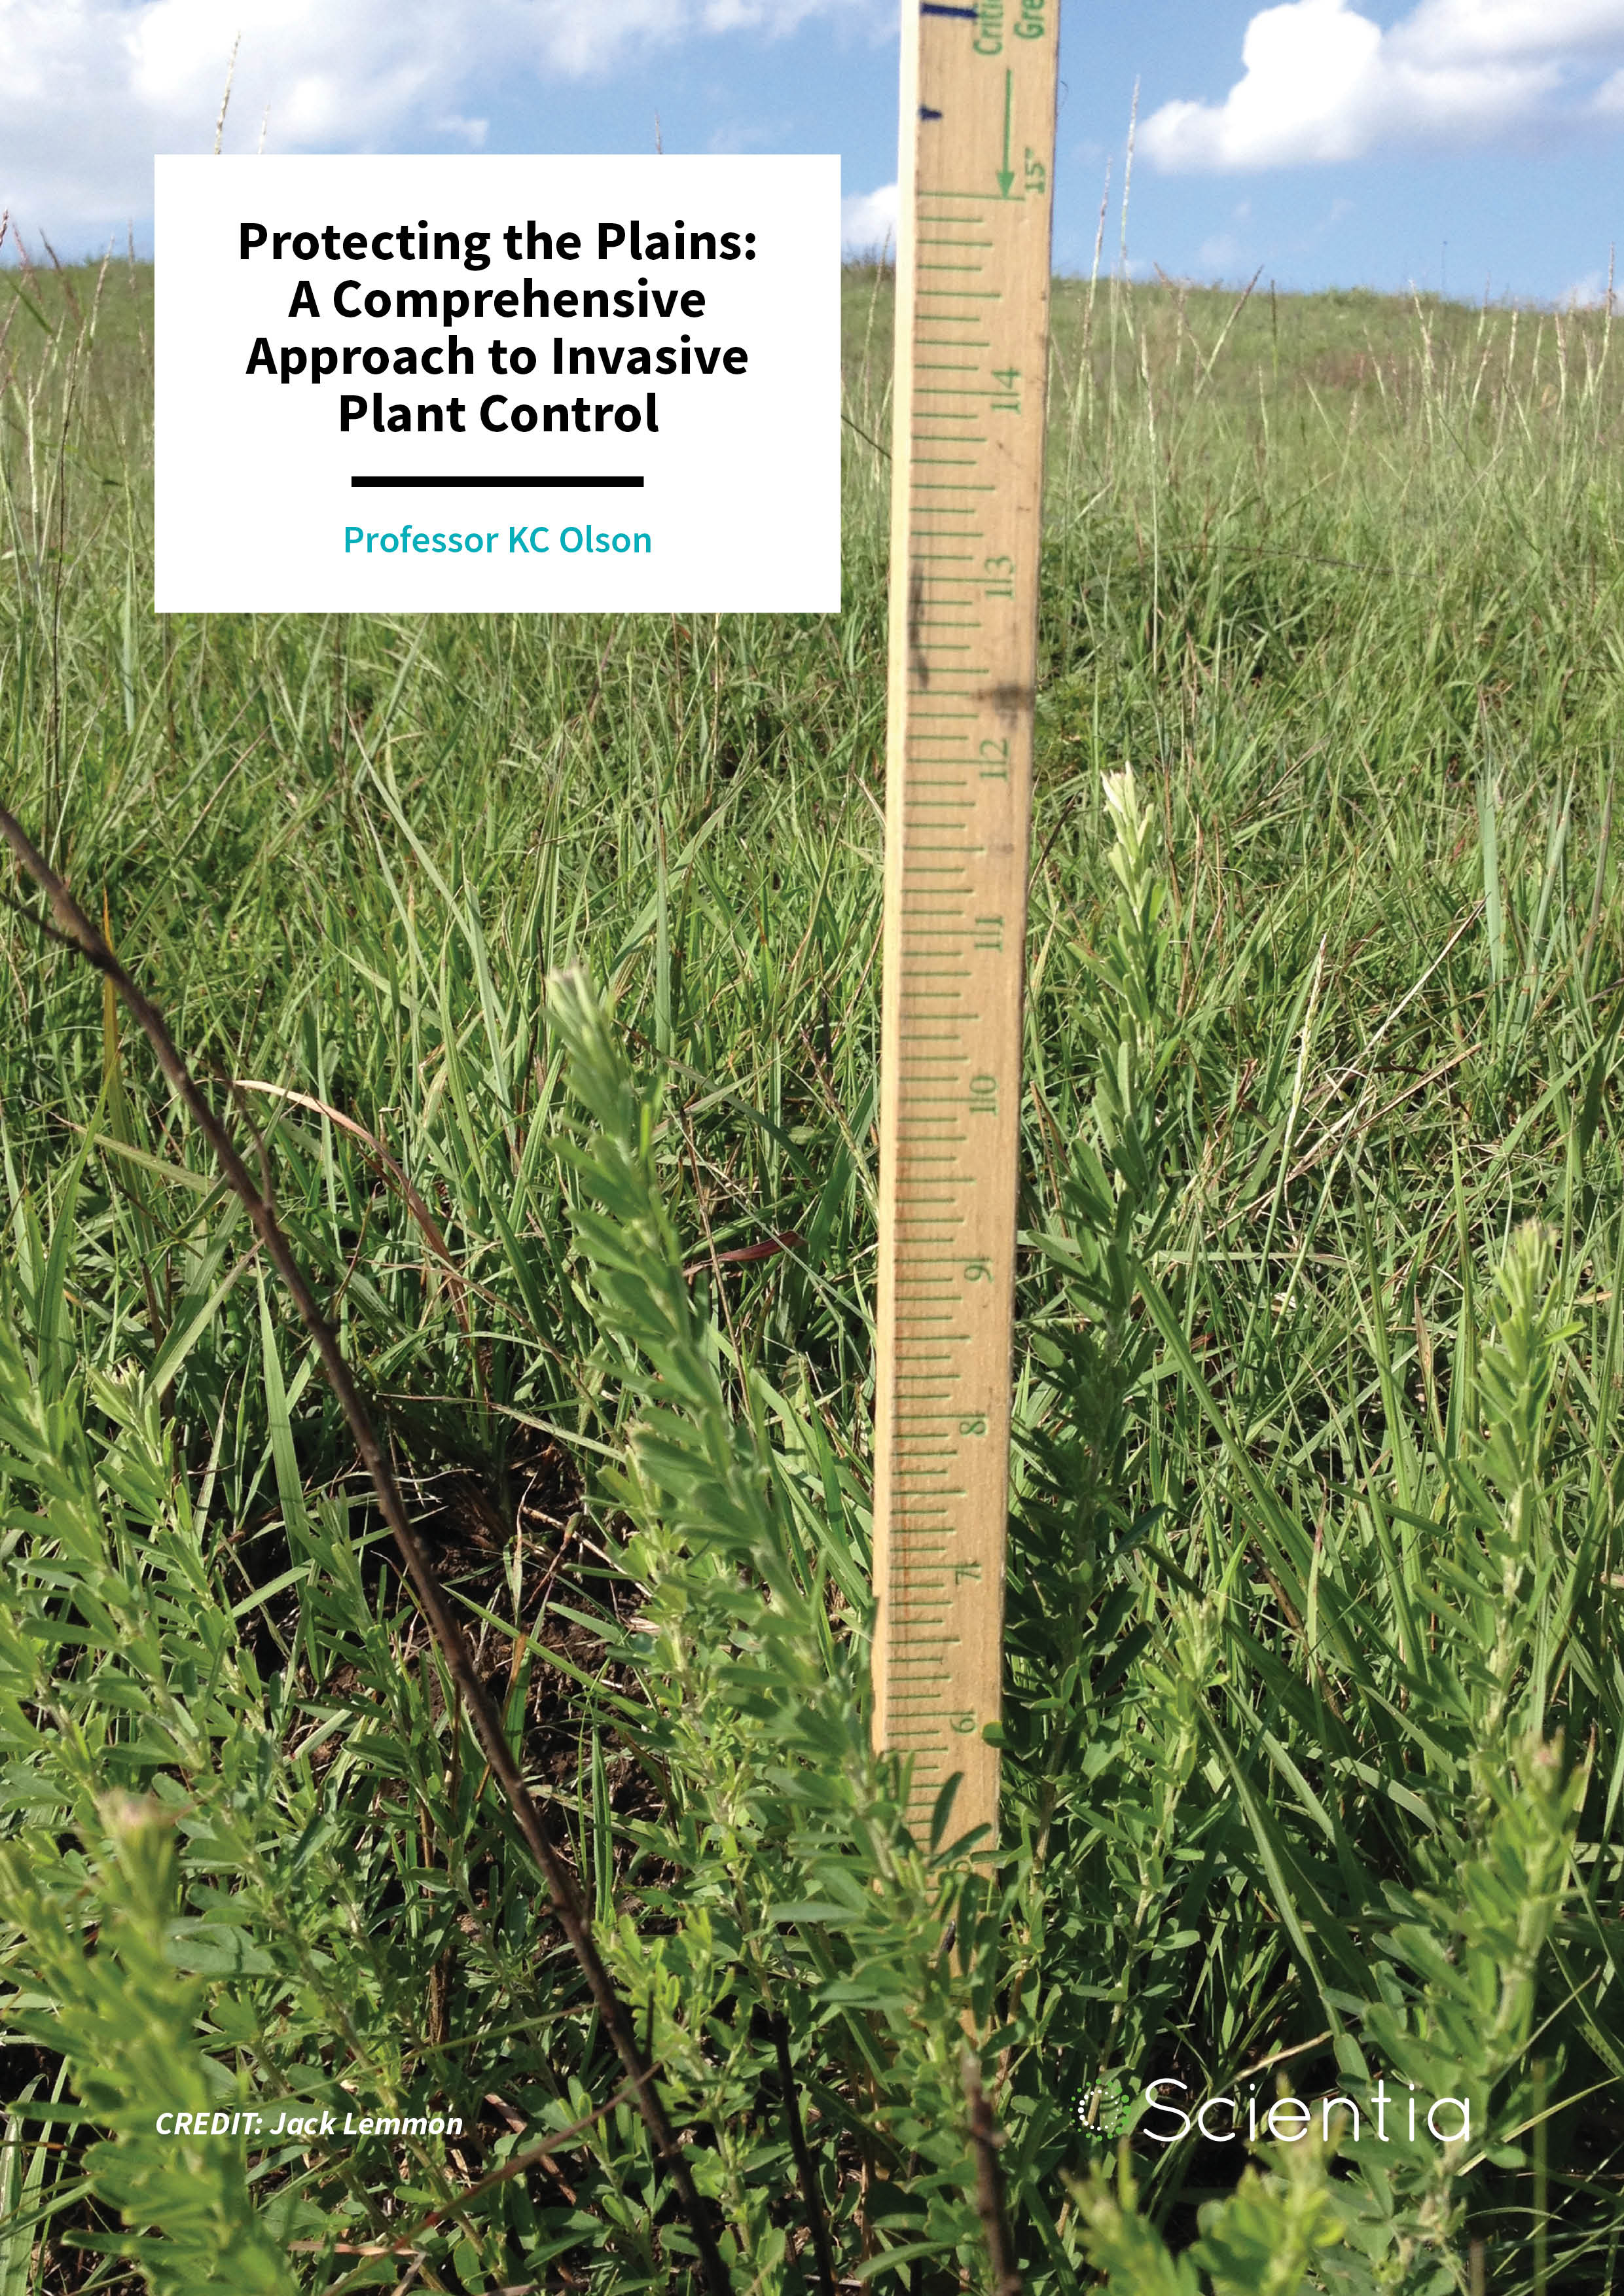 Professor KC Olson – Protecting the Plains: A Comprehensive Approach to Invasive Plant Control